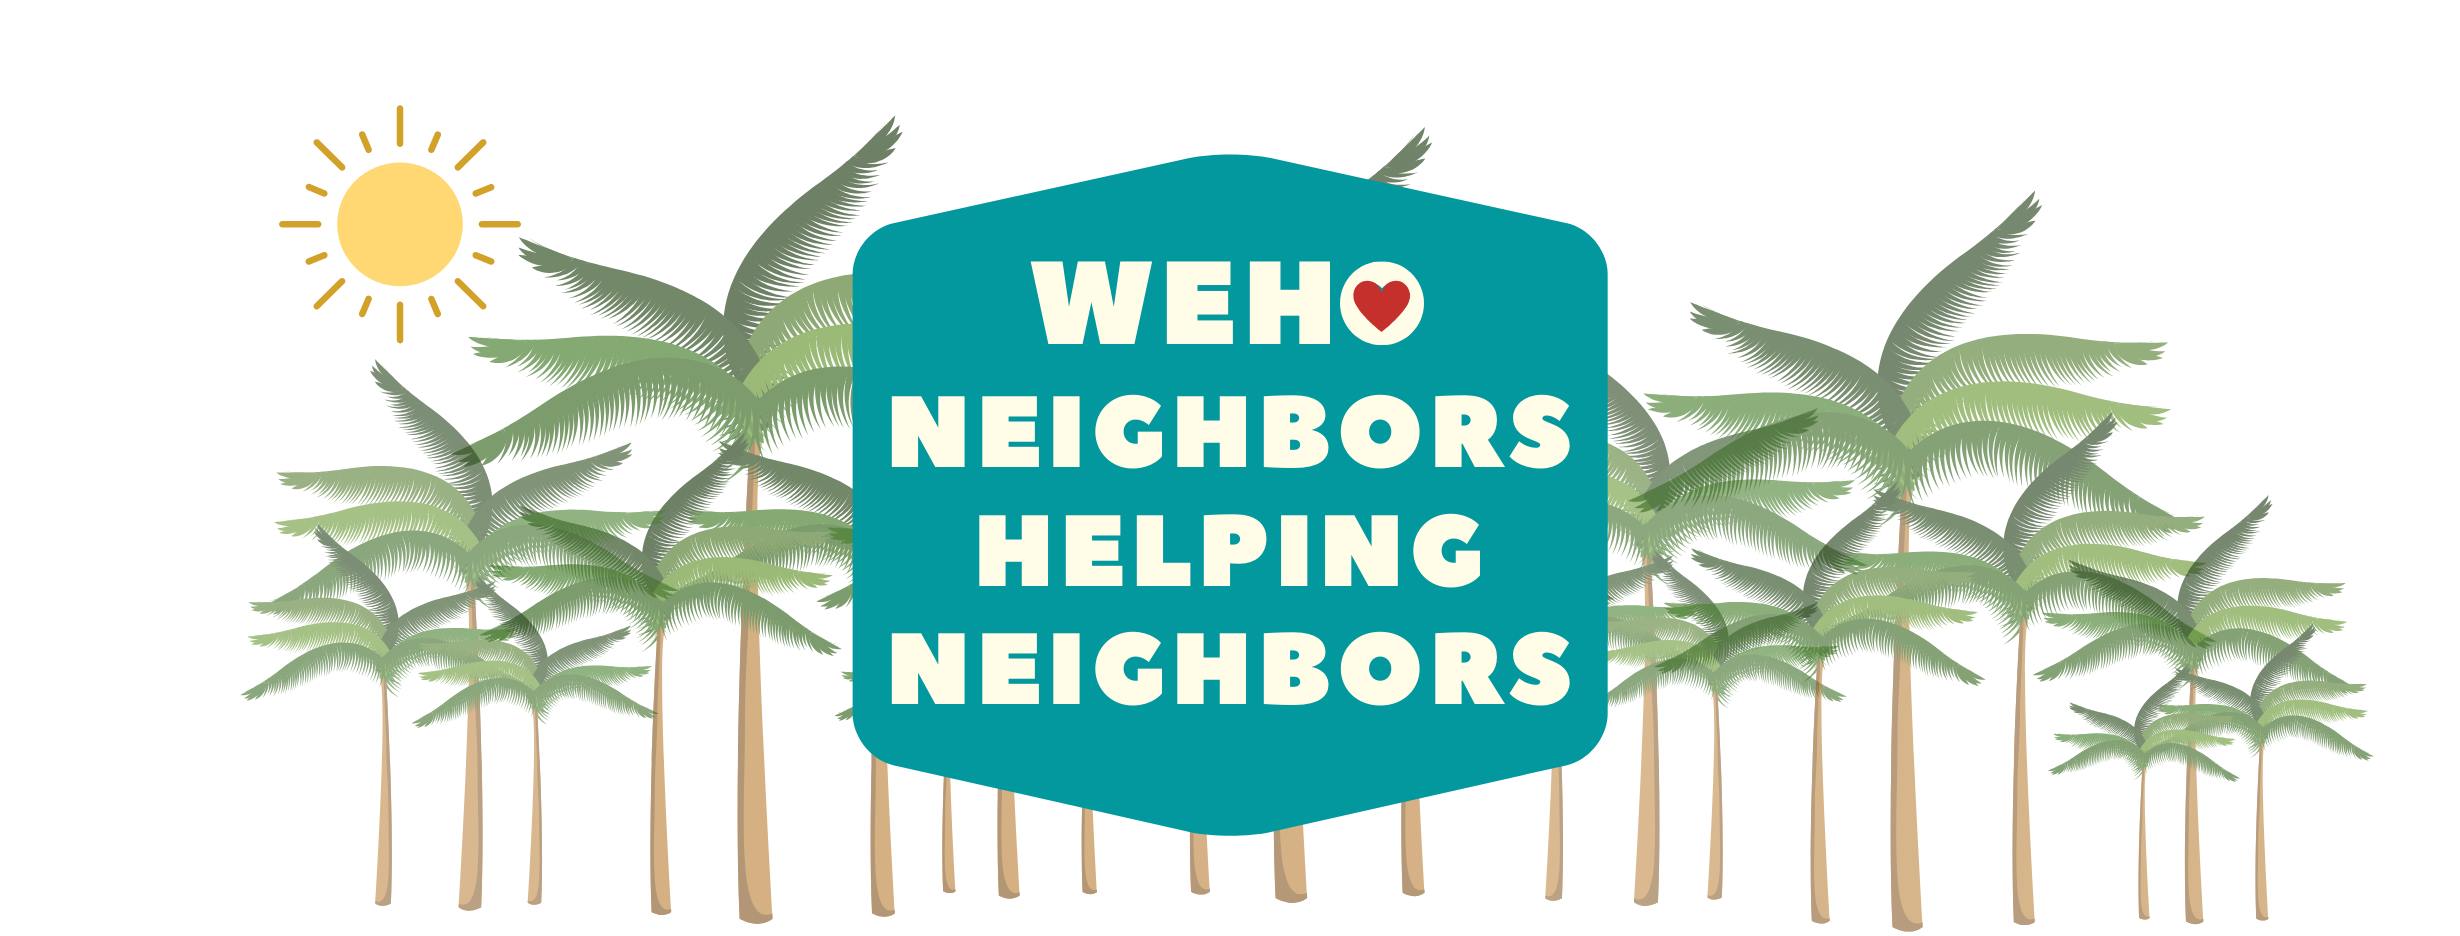 WeHo Neighbors Helping Neighbors green logo with palm trees in background